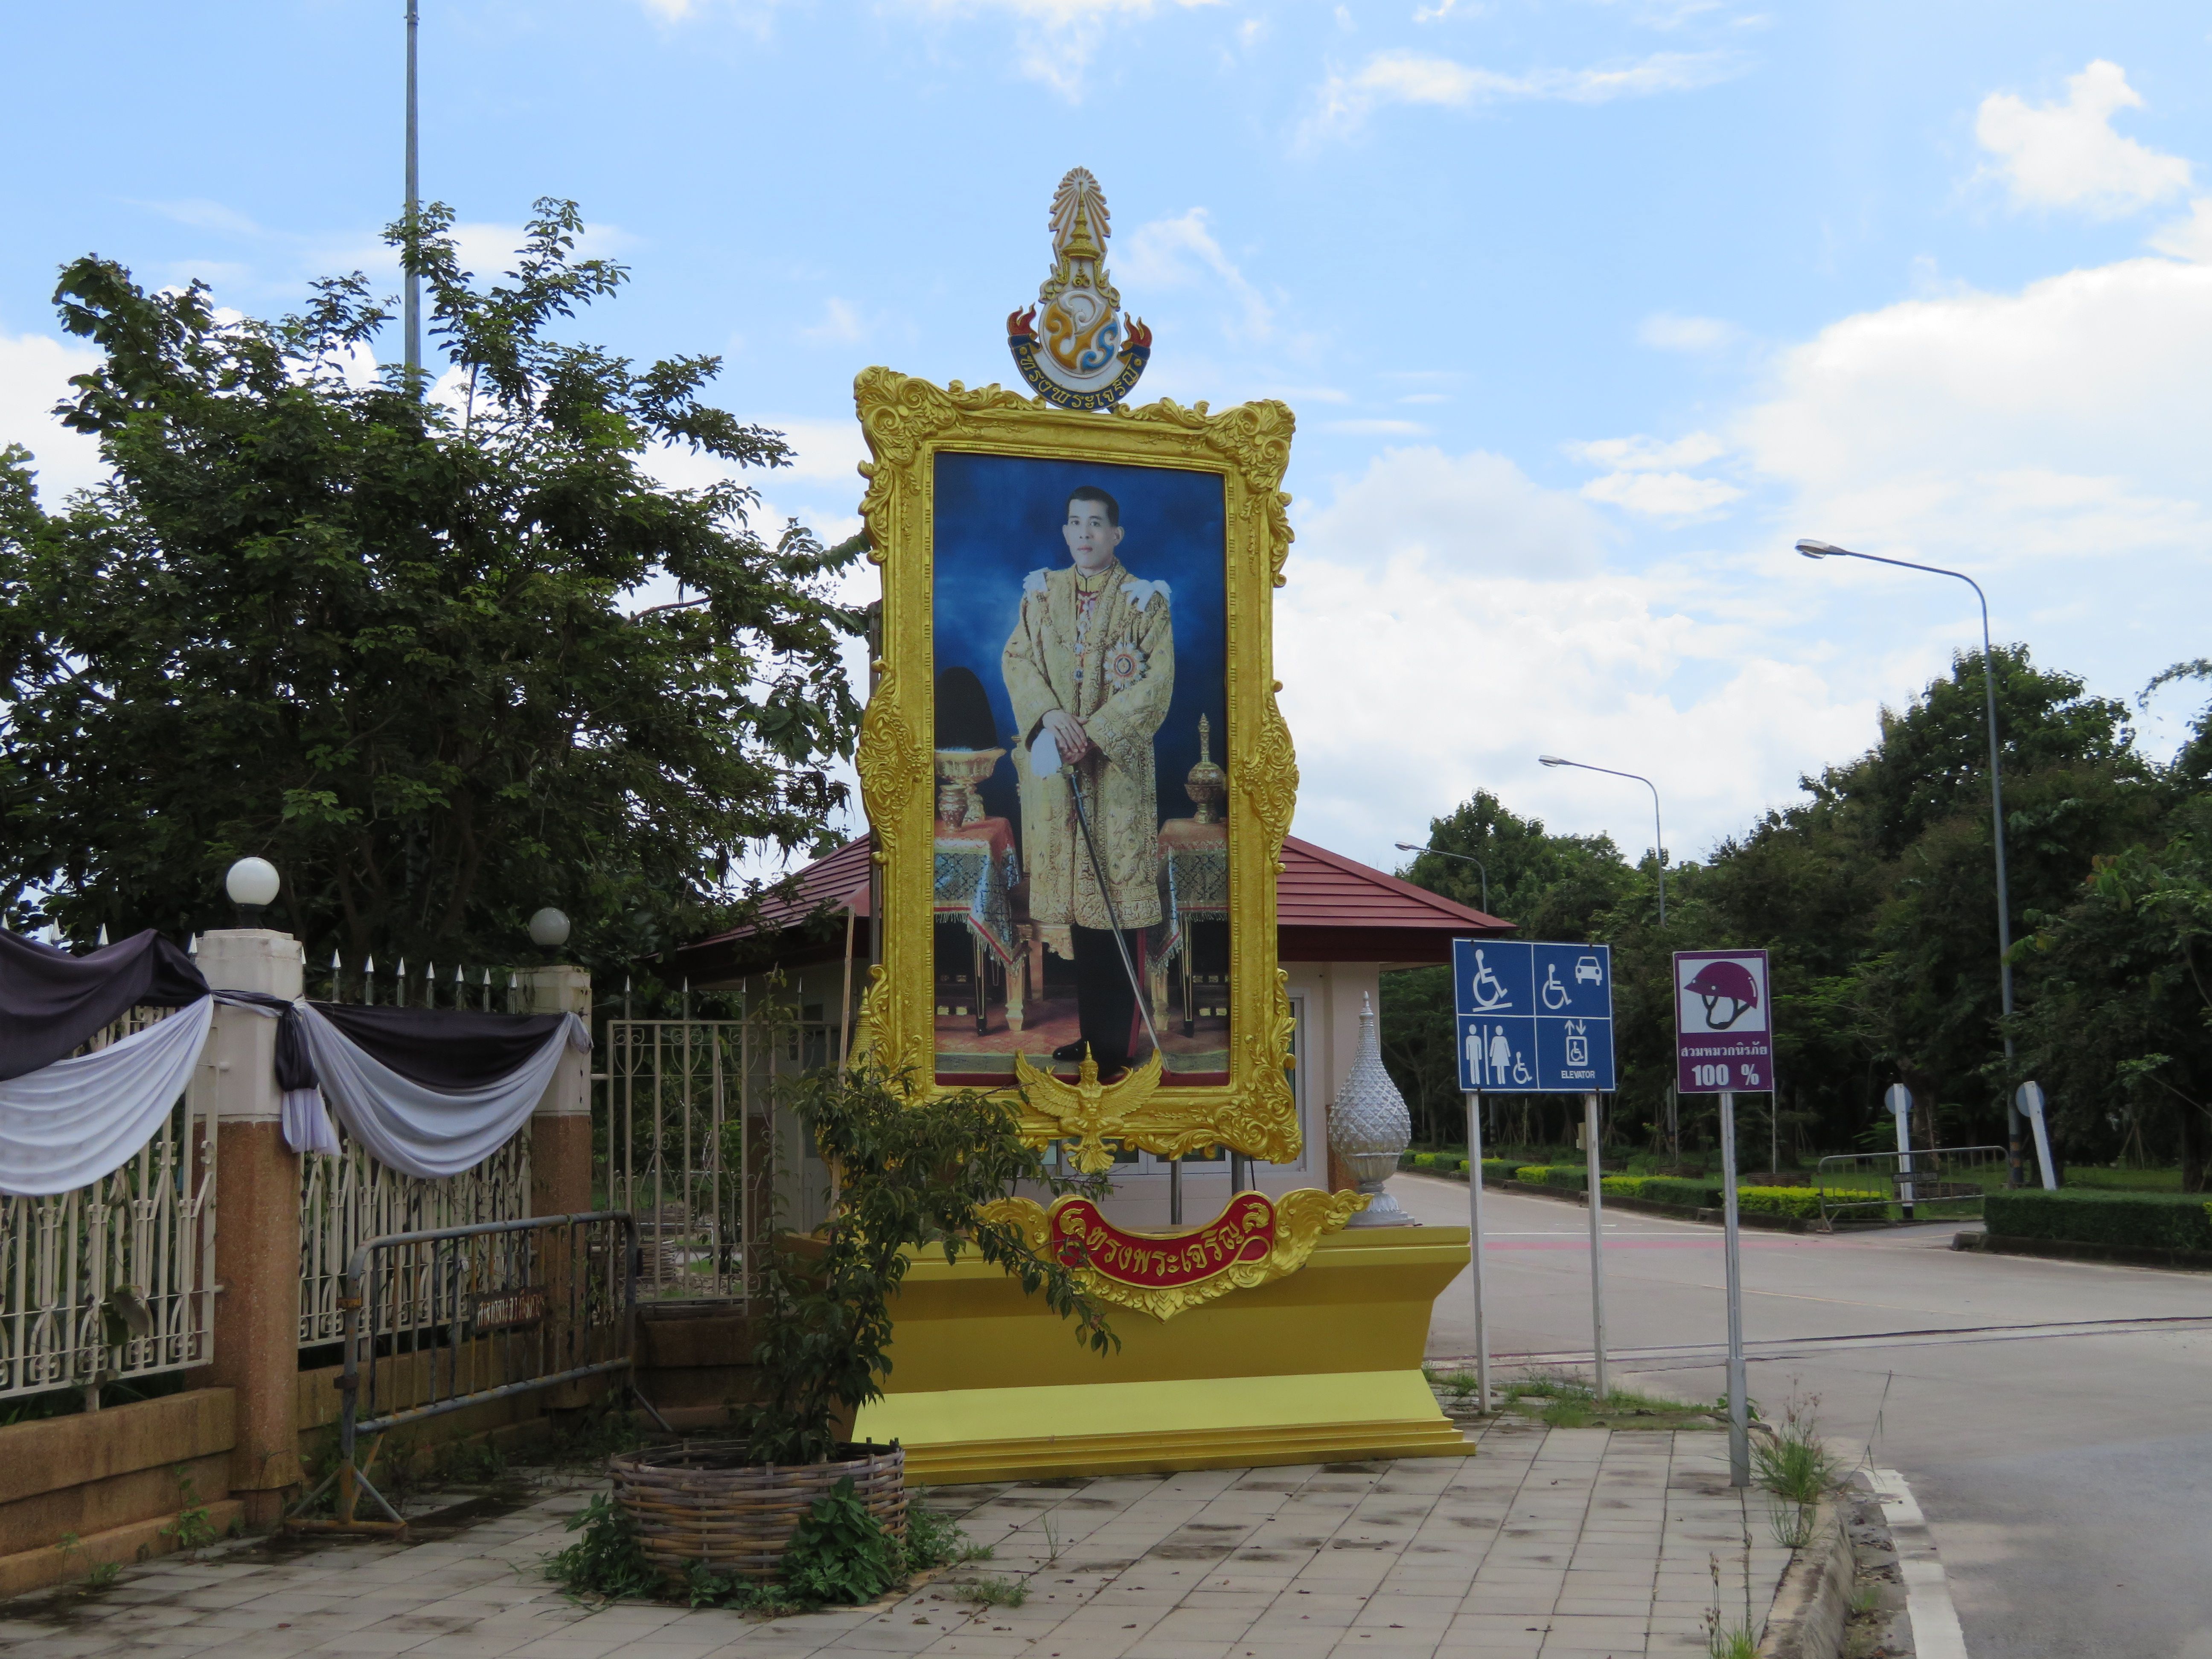 Pictures of new King Maha Vajiralongkorn are going up everywhere in Thailand, even as the country's ruling military junta enforces the most draconian lèse-majesté laws in the world. Image by Richard Bernstein. Thailand, 2017.